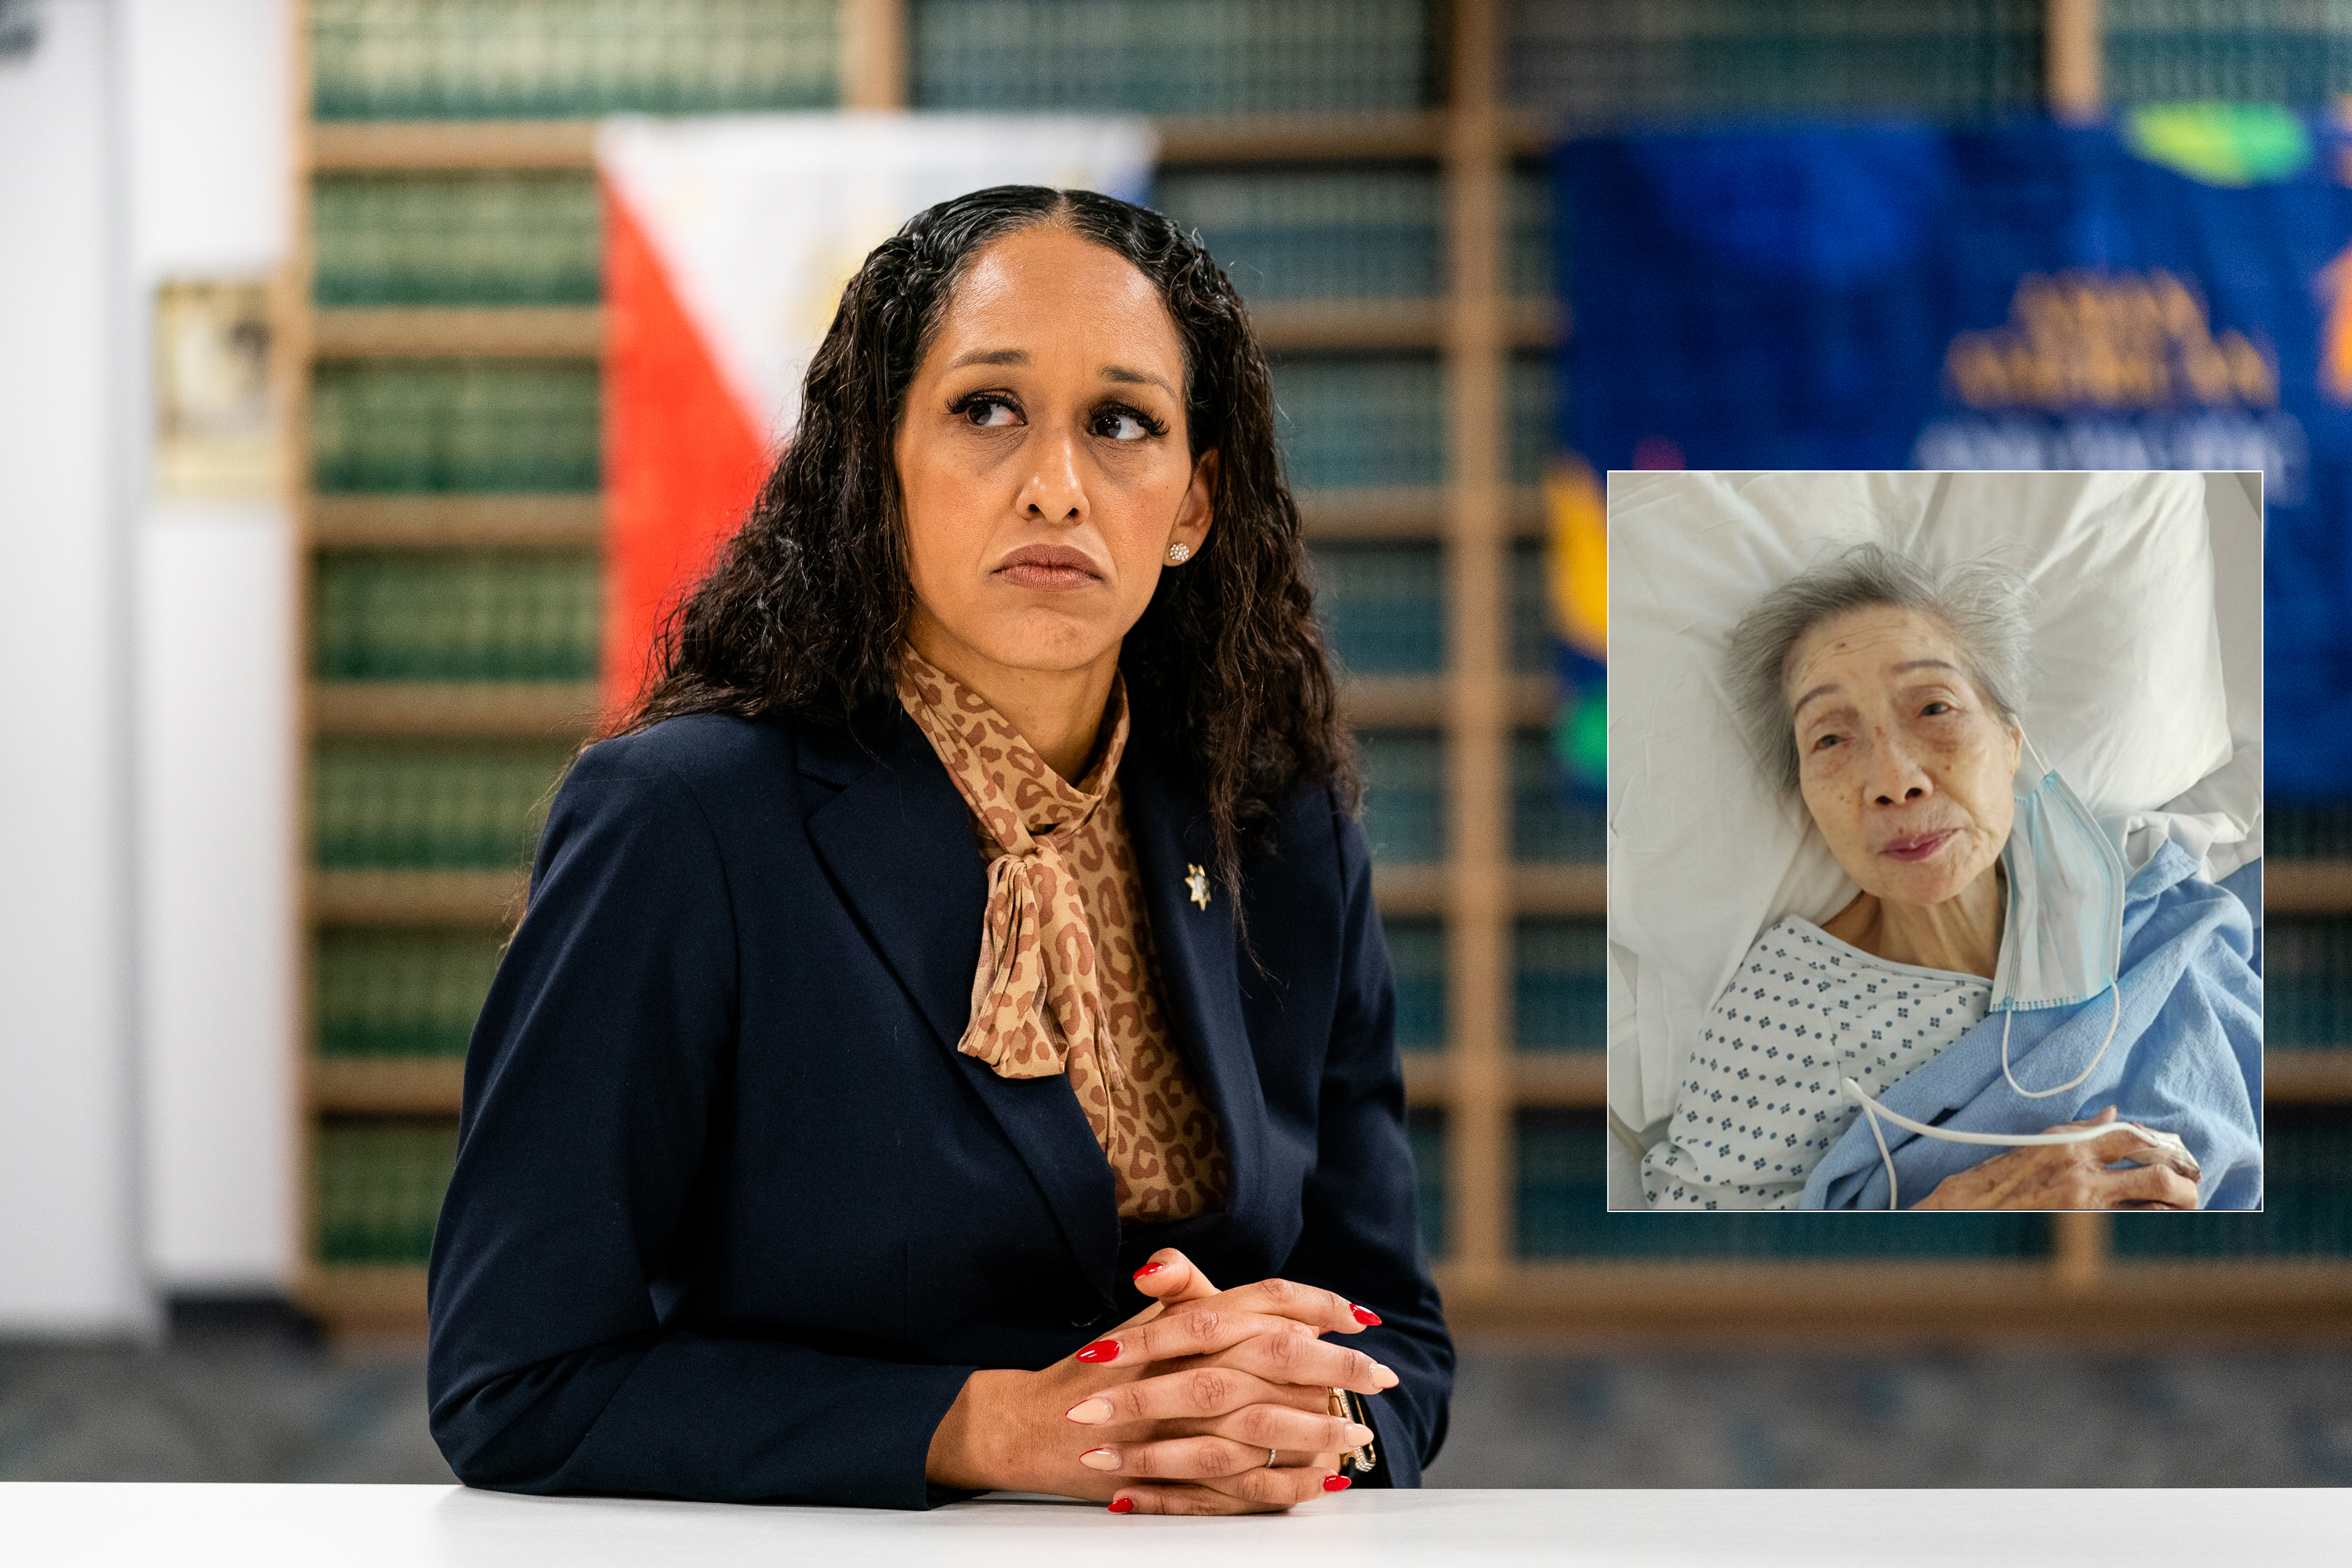 District Attorney Brooke Jenkins looking into the distance with an inset image of a older woman in a hospital bed.